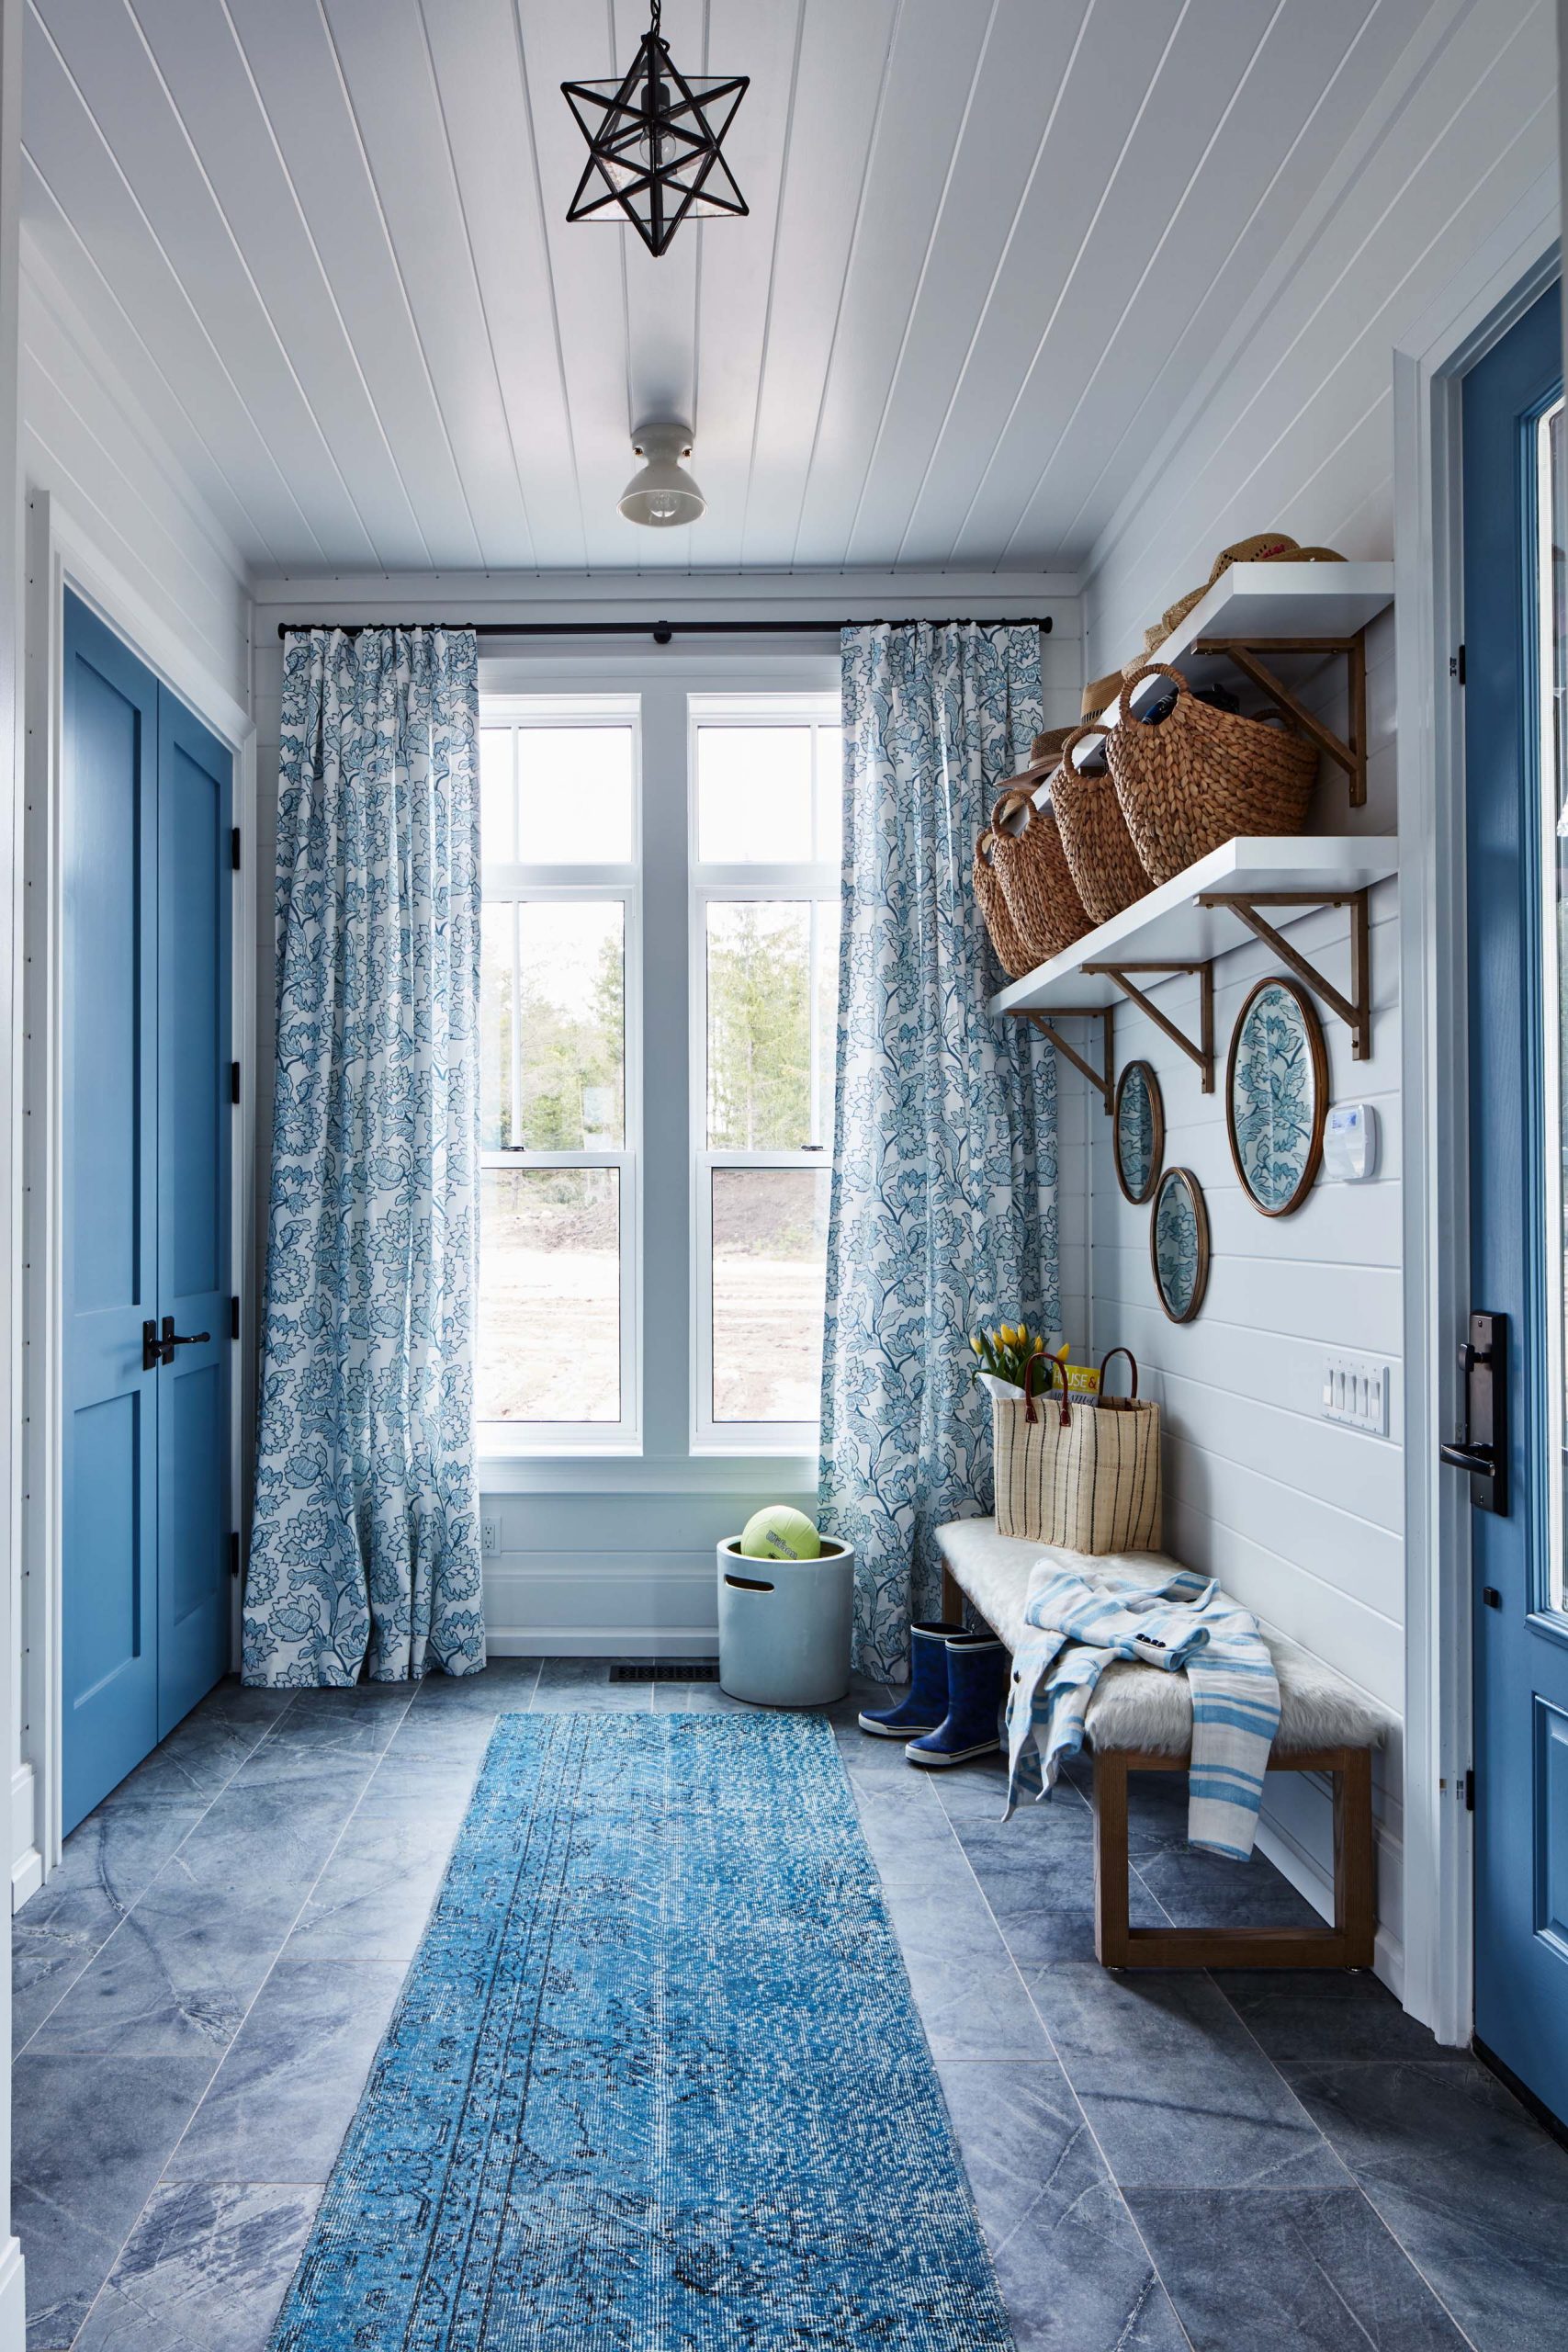 Soft blues distinguish this mud room with its elongated bench and easily washed tiles.